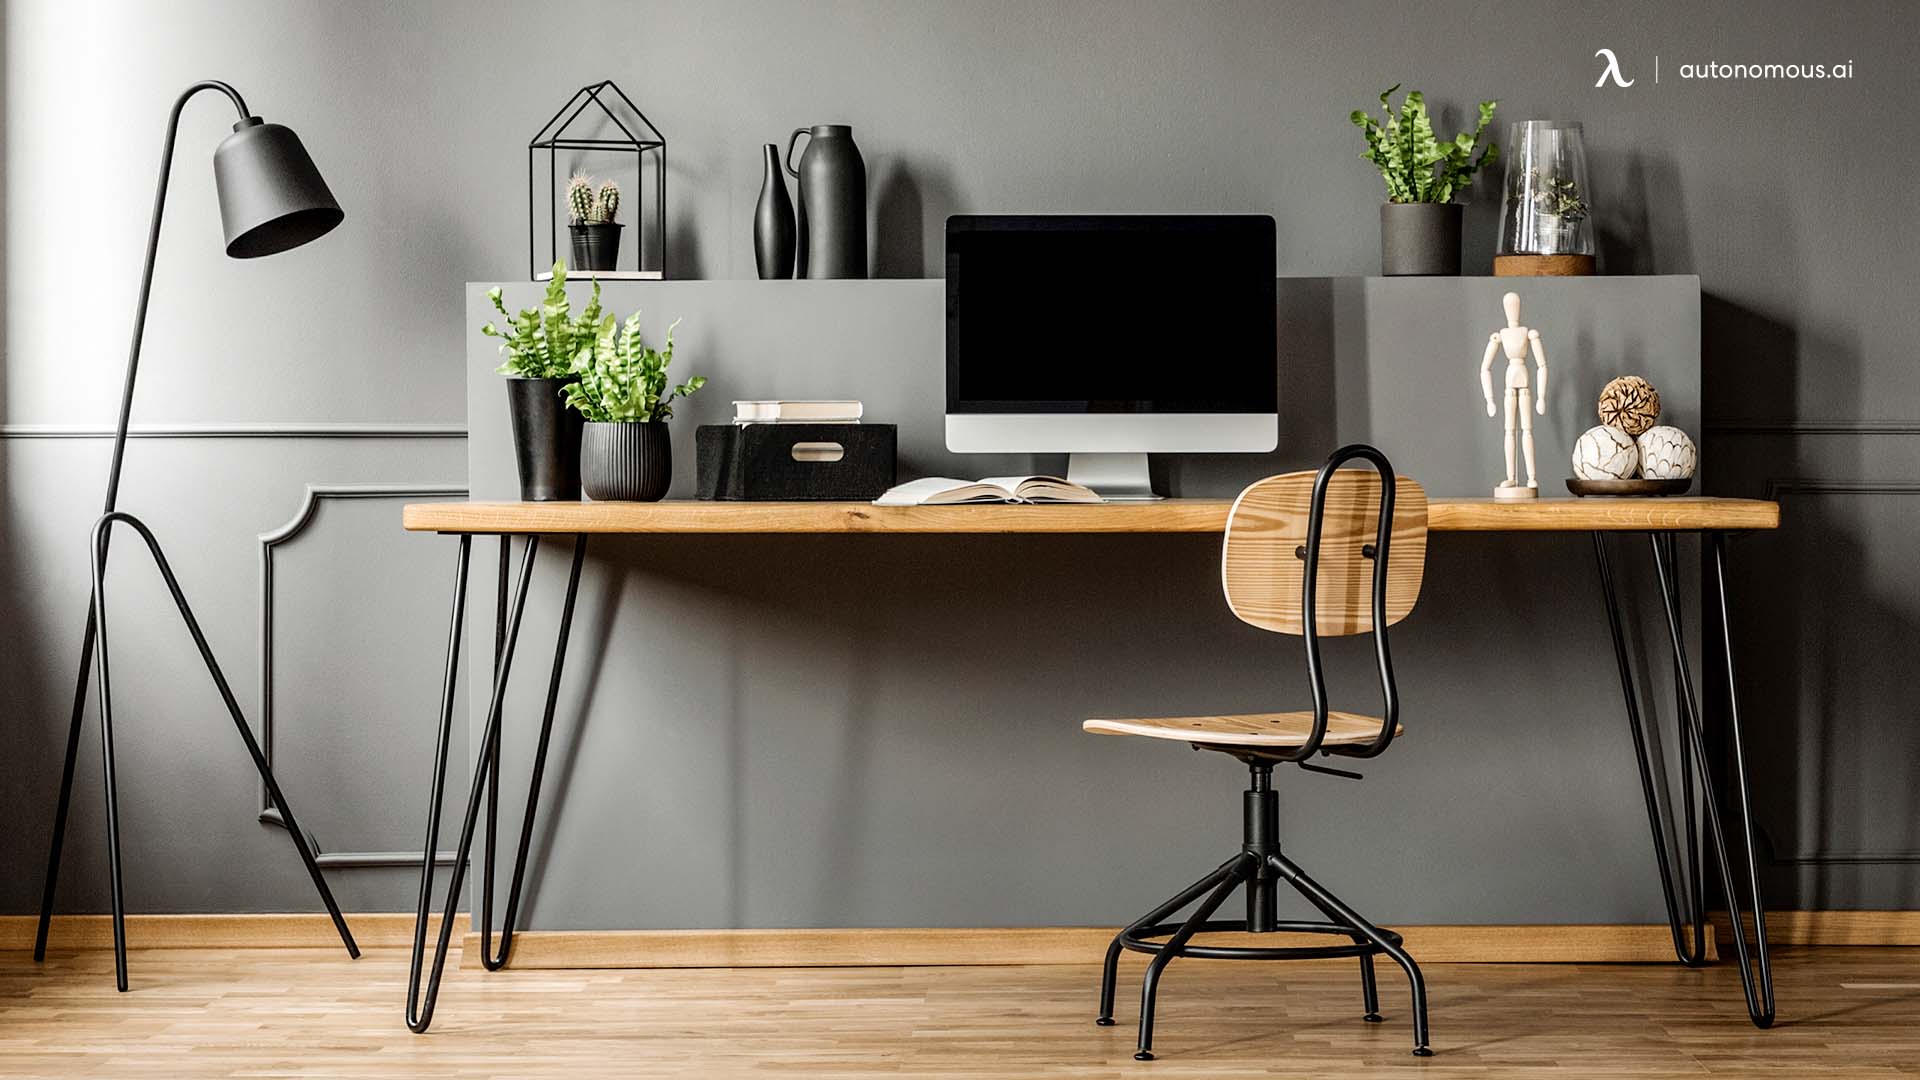 Creating a Masculine Home Office Design for Men, Dark and Bold 